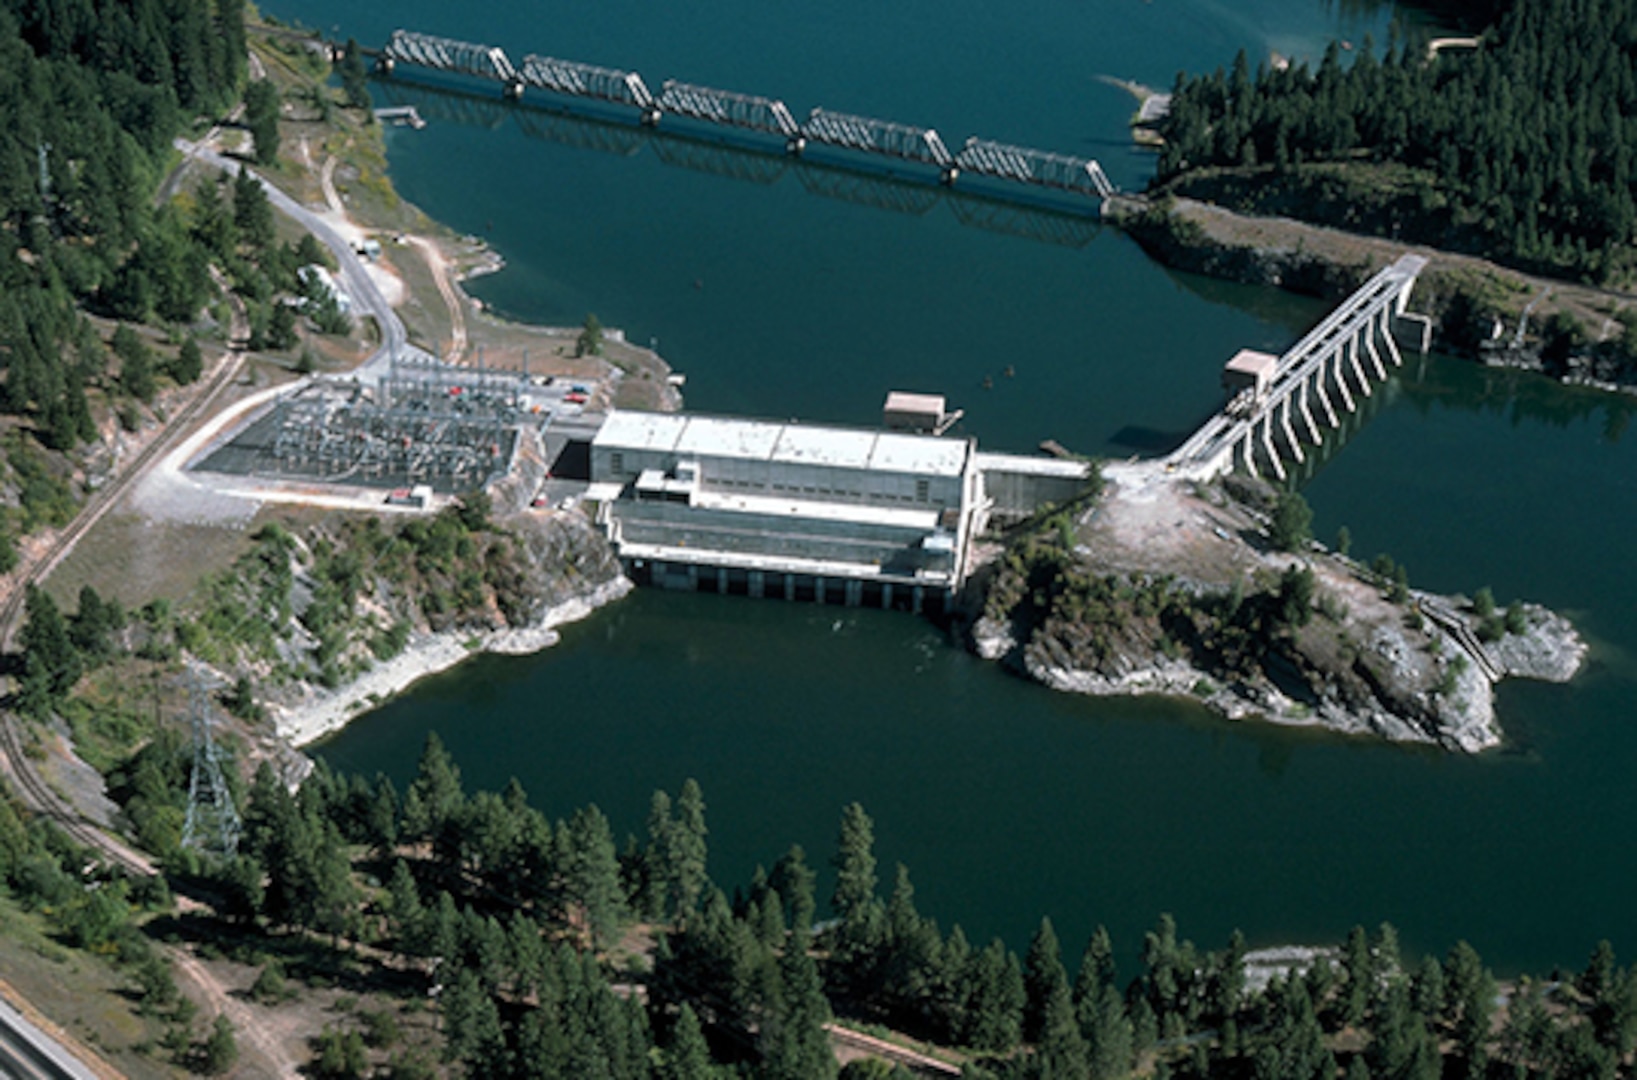 The U.S. Army Corps of Engineers is using a 65-ton crane provided by DLA Troop Support Pacific for hydraulic hoist maintenance on lift gates at the Albeni Falls Dam in Idaho. The dam converts river water into hydroelectricity, reduces floods and provides recreational activities.